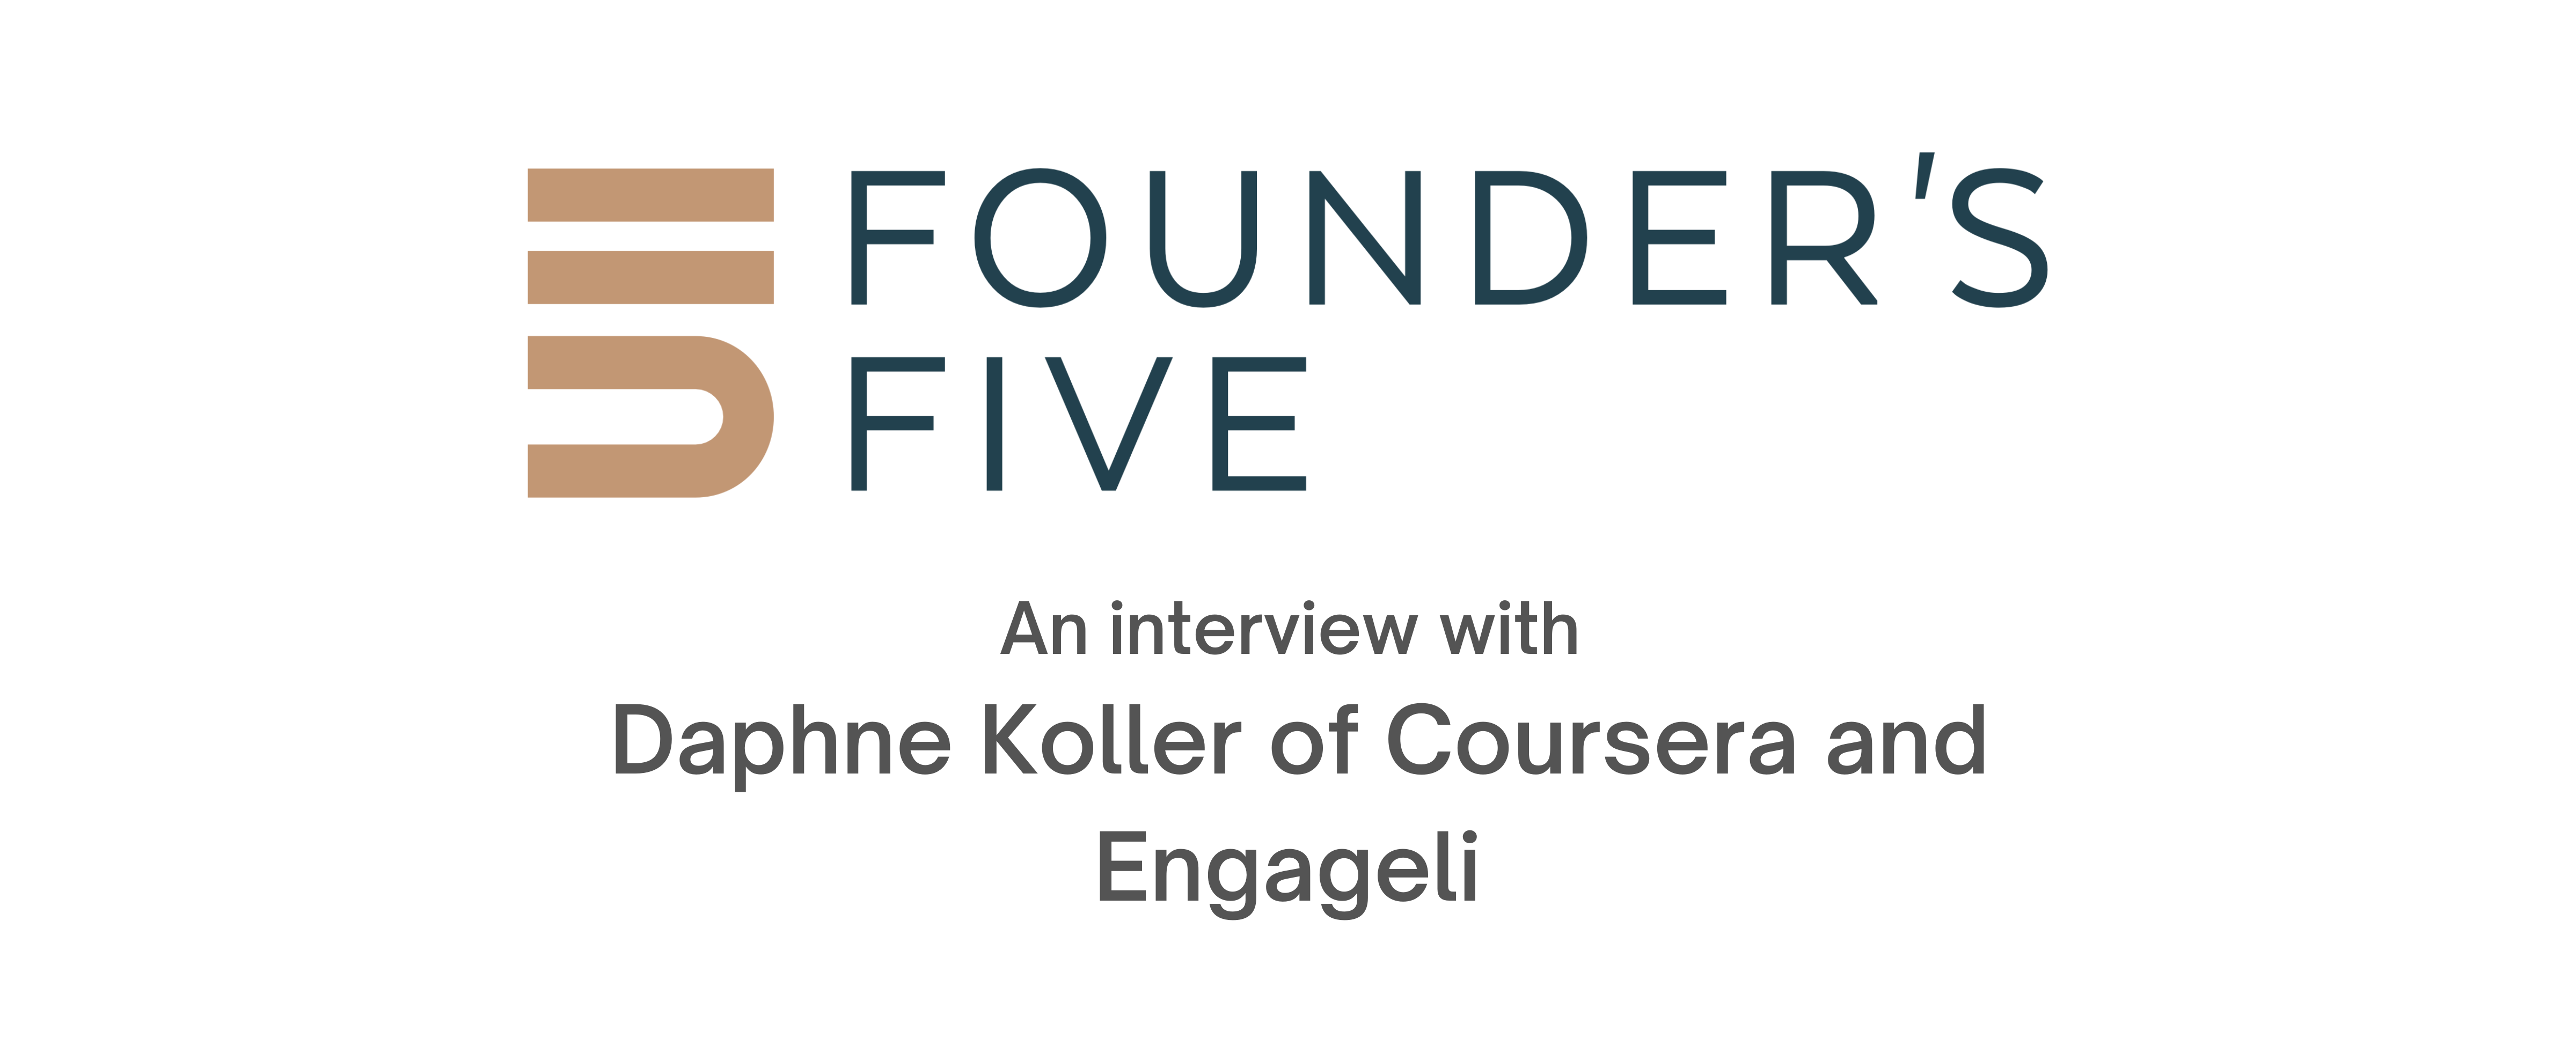 Tyton Partners Founder's Five Daphne Koller of Coursera and Engageli